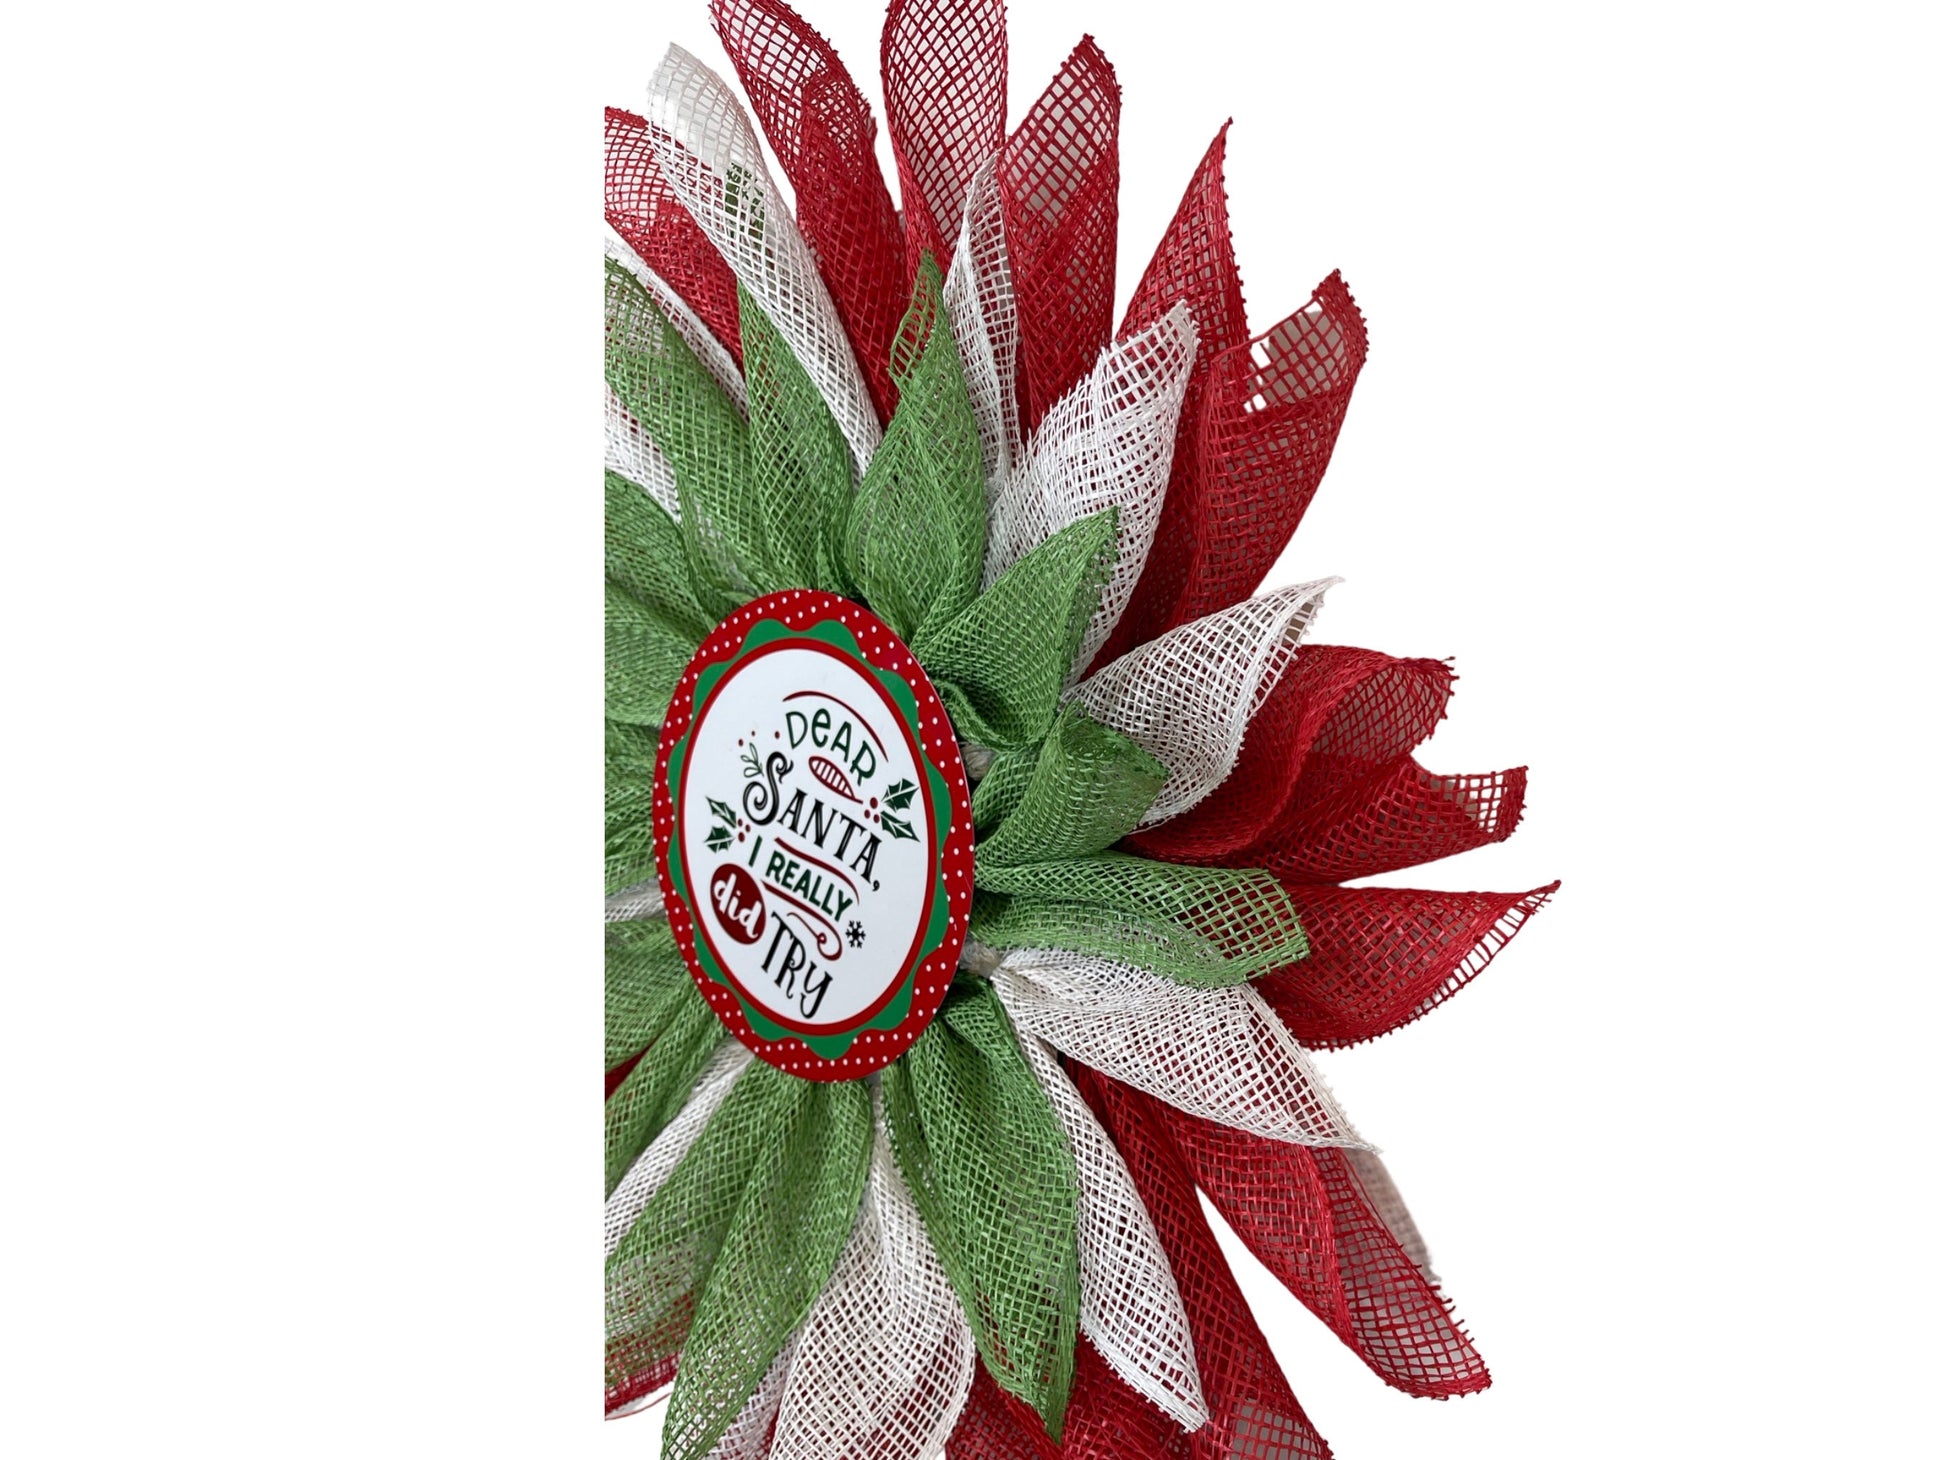 flat, red, white and green flat Christmas flower wreath, Christmas wreath for screen door, flower wreath for screen door